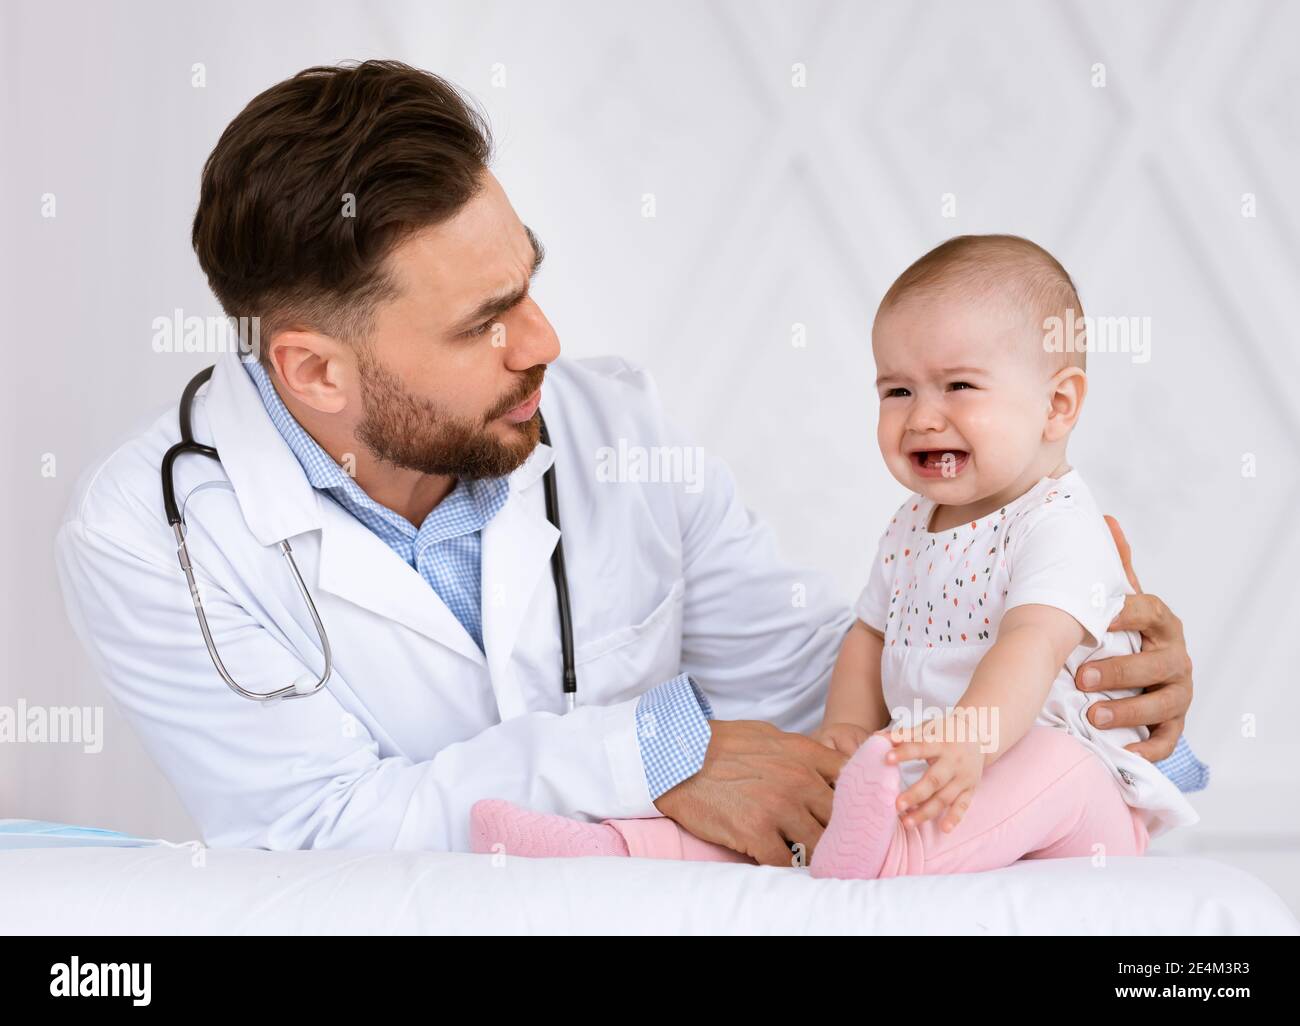 Baby Crying On Medical Checkup With Doctor Sitting In Clinic Stock Photo